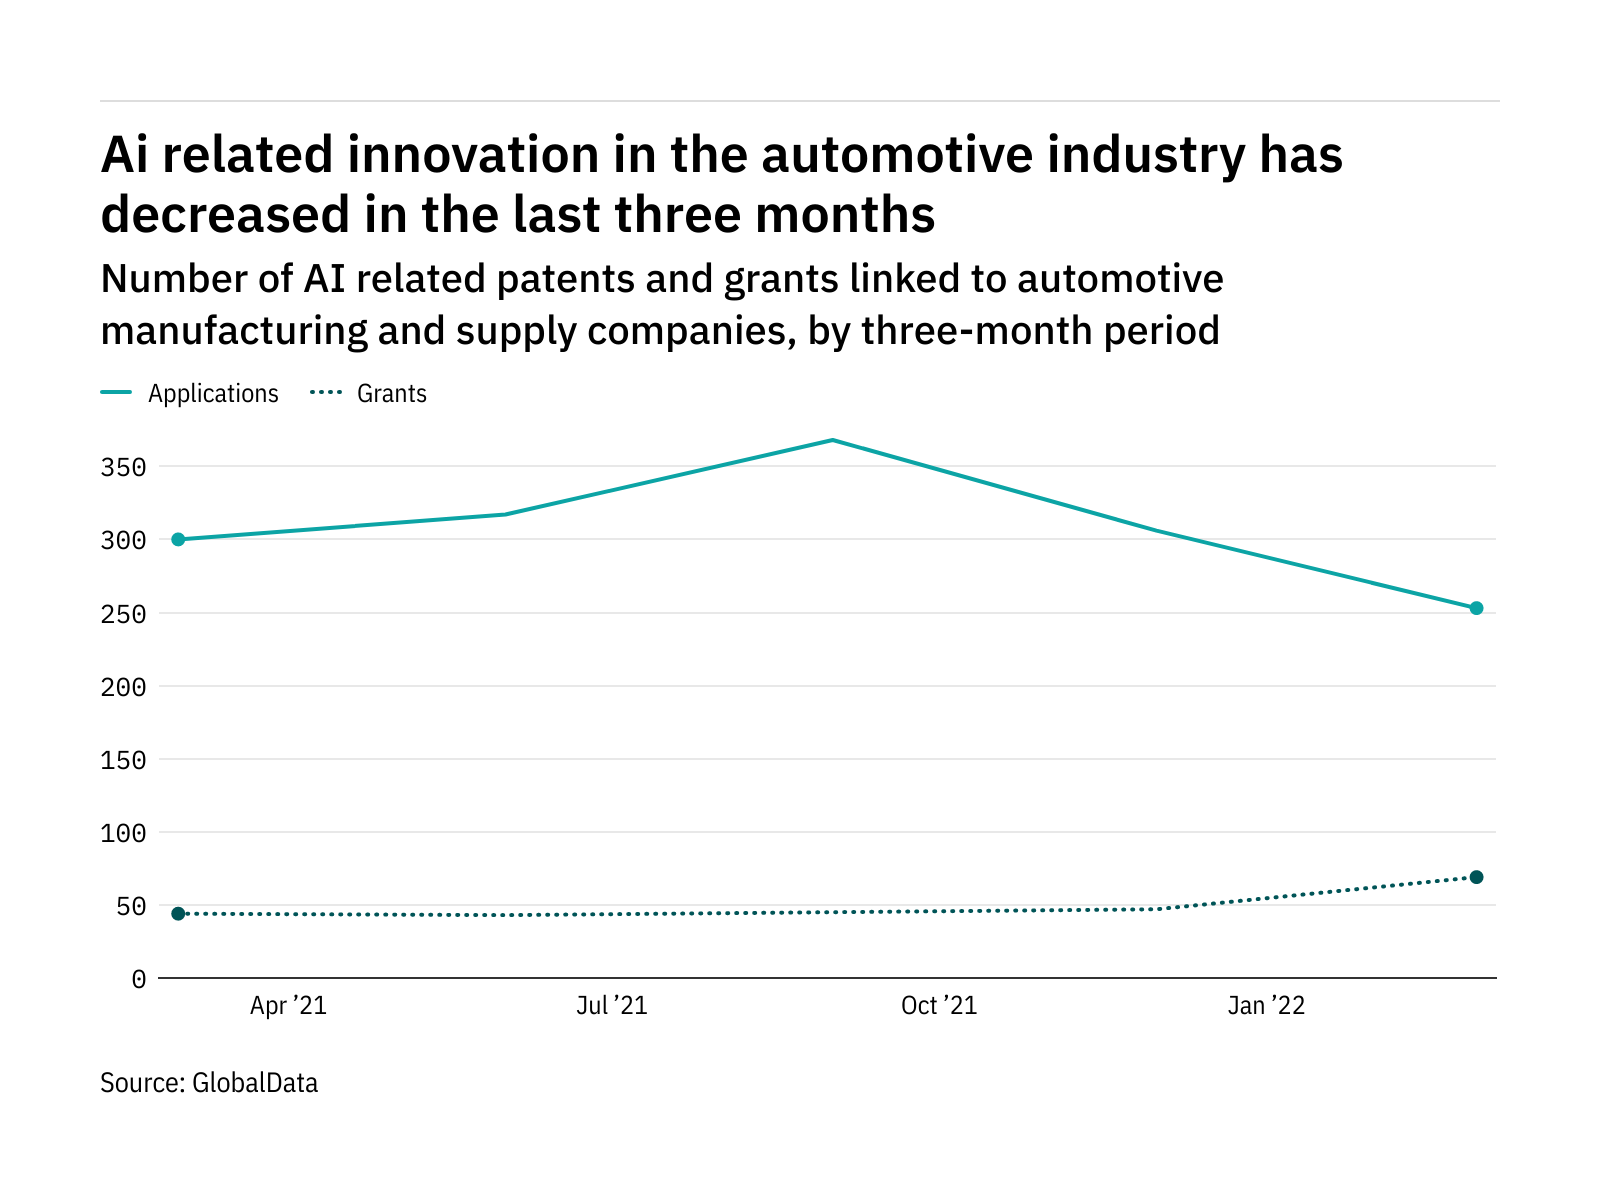 Artificial intelligence innovation among automotive industry companies has dropped off in the last year